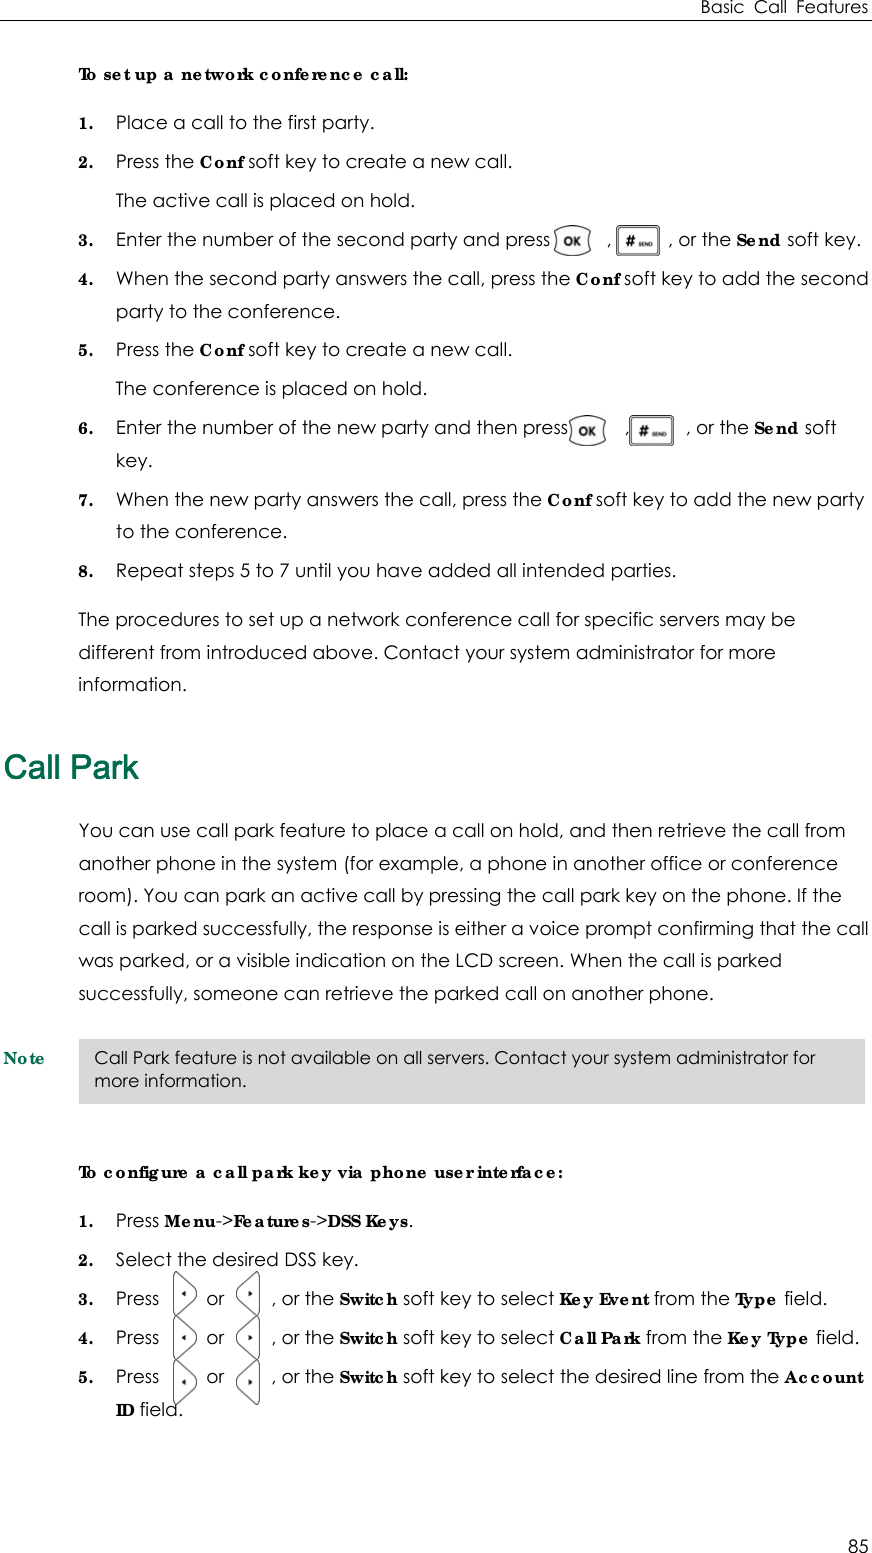 Basic Call Features 85 To set up a network conference call: 1. Place a call to the first party. 2. Press the Conf soft key to create a new call. The active call is placed on hold. 3. Enter the number of the second party and press      ,      , or the Send soft key. 4. When the second party answers the call, press the Conf soft key to add the second party to the conference. 5. Press the Conf soft key to create a new call. The conference is placed on hold. 6. Enter the number of the new party and then press            ,            , or the Send soft key. 7. When the new party answers the call, press the Conf soft key to add the new party to the conference. 8. Repeat steps 5 to 7 until you have added all intended parties. The procedures to set up a network conference call for specific servers may be different from introduced above. Contact your system administrator for more information. Call Park You can use call park feature to place a call on hold, and then retrieve the call from another phone in the system (for example, a phone in another office or conference room). You can park an active call by pressing the call park key on the phone. If the call is parked successfully, the response is either a voice prompt confirming that the call was parked, or a visible indication on the LCD screen. When the call is parked successfully, someone can retrieve the parked call on another phone. Note To configure a call park key via phone user interface: 1. Press Menu-&gt;Features-&gt;DSS Keys. 2. Select the desired DSS key. 3. Press     or     , or the Switch soft key to select Key Event from the Type field. 4. Press     or     , or the Switch soft key to select Call Park from the Key Type field. 5. Press     or     , or the Switch soft key to select the desired line from the Account ID field.   Call Park feature is not available on all servers. Contact your system administrator for more information. 